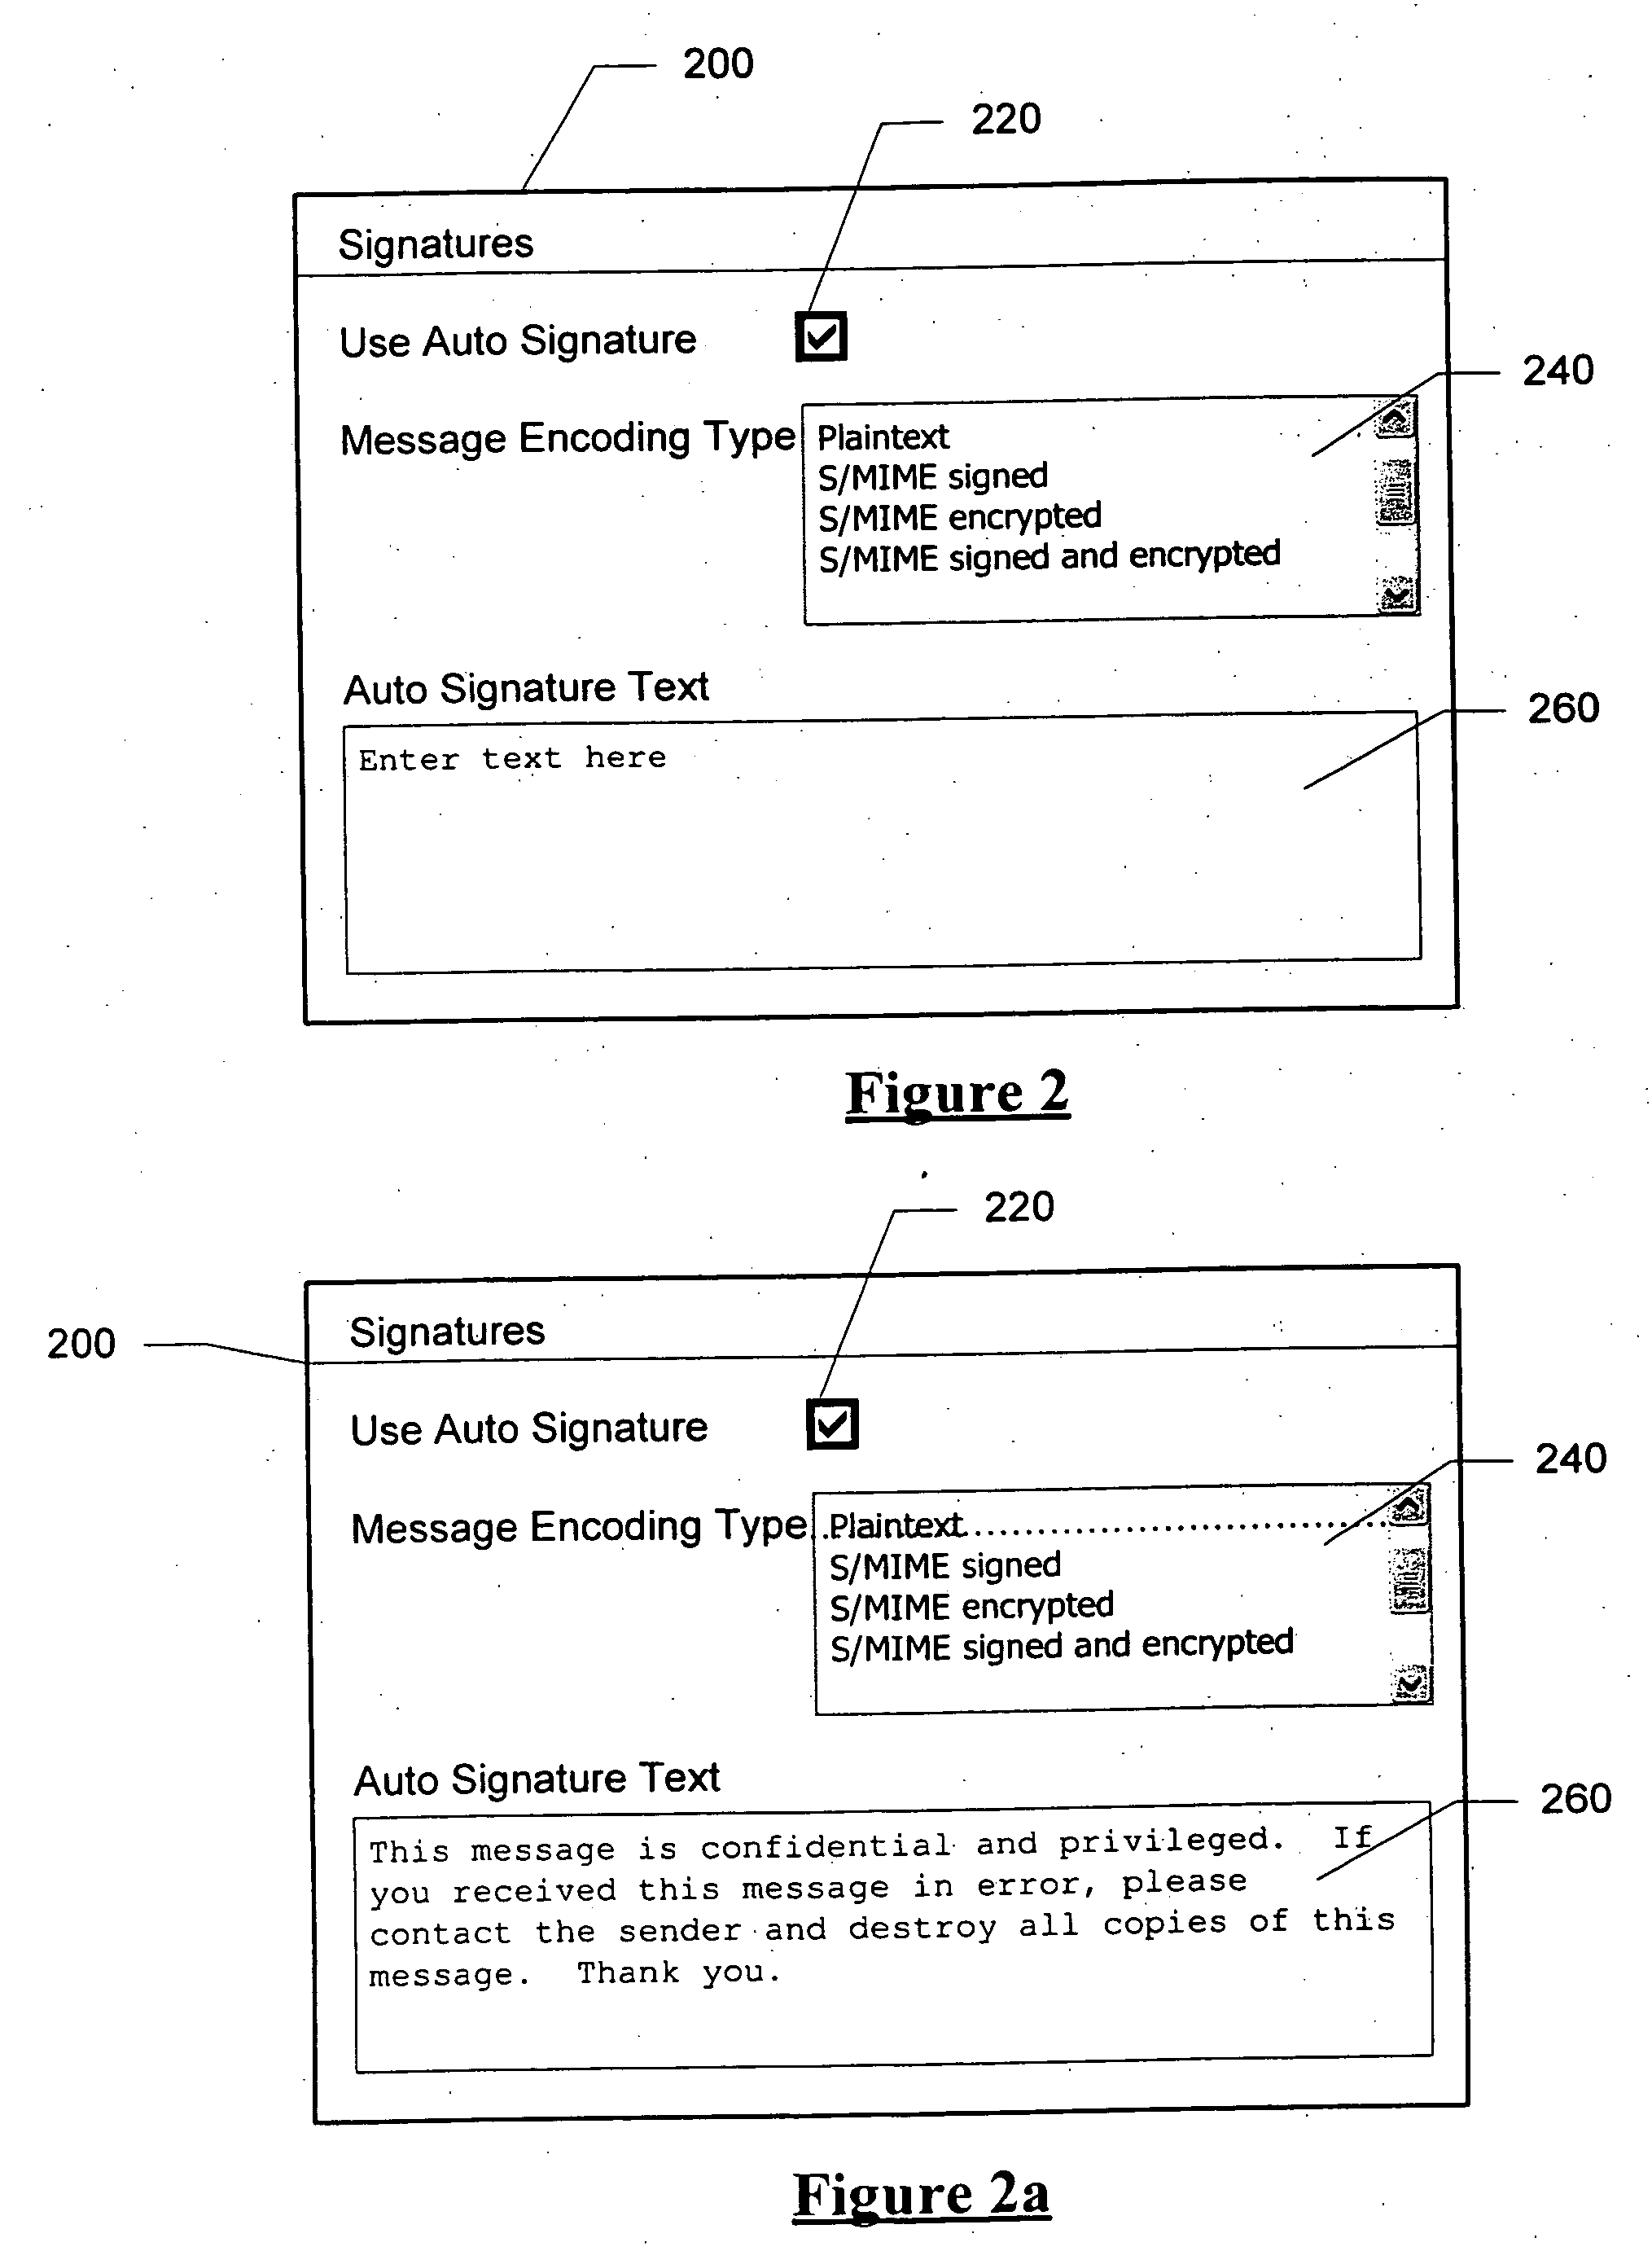 Automated selection and inclusion of a message signature